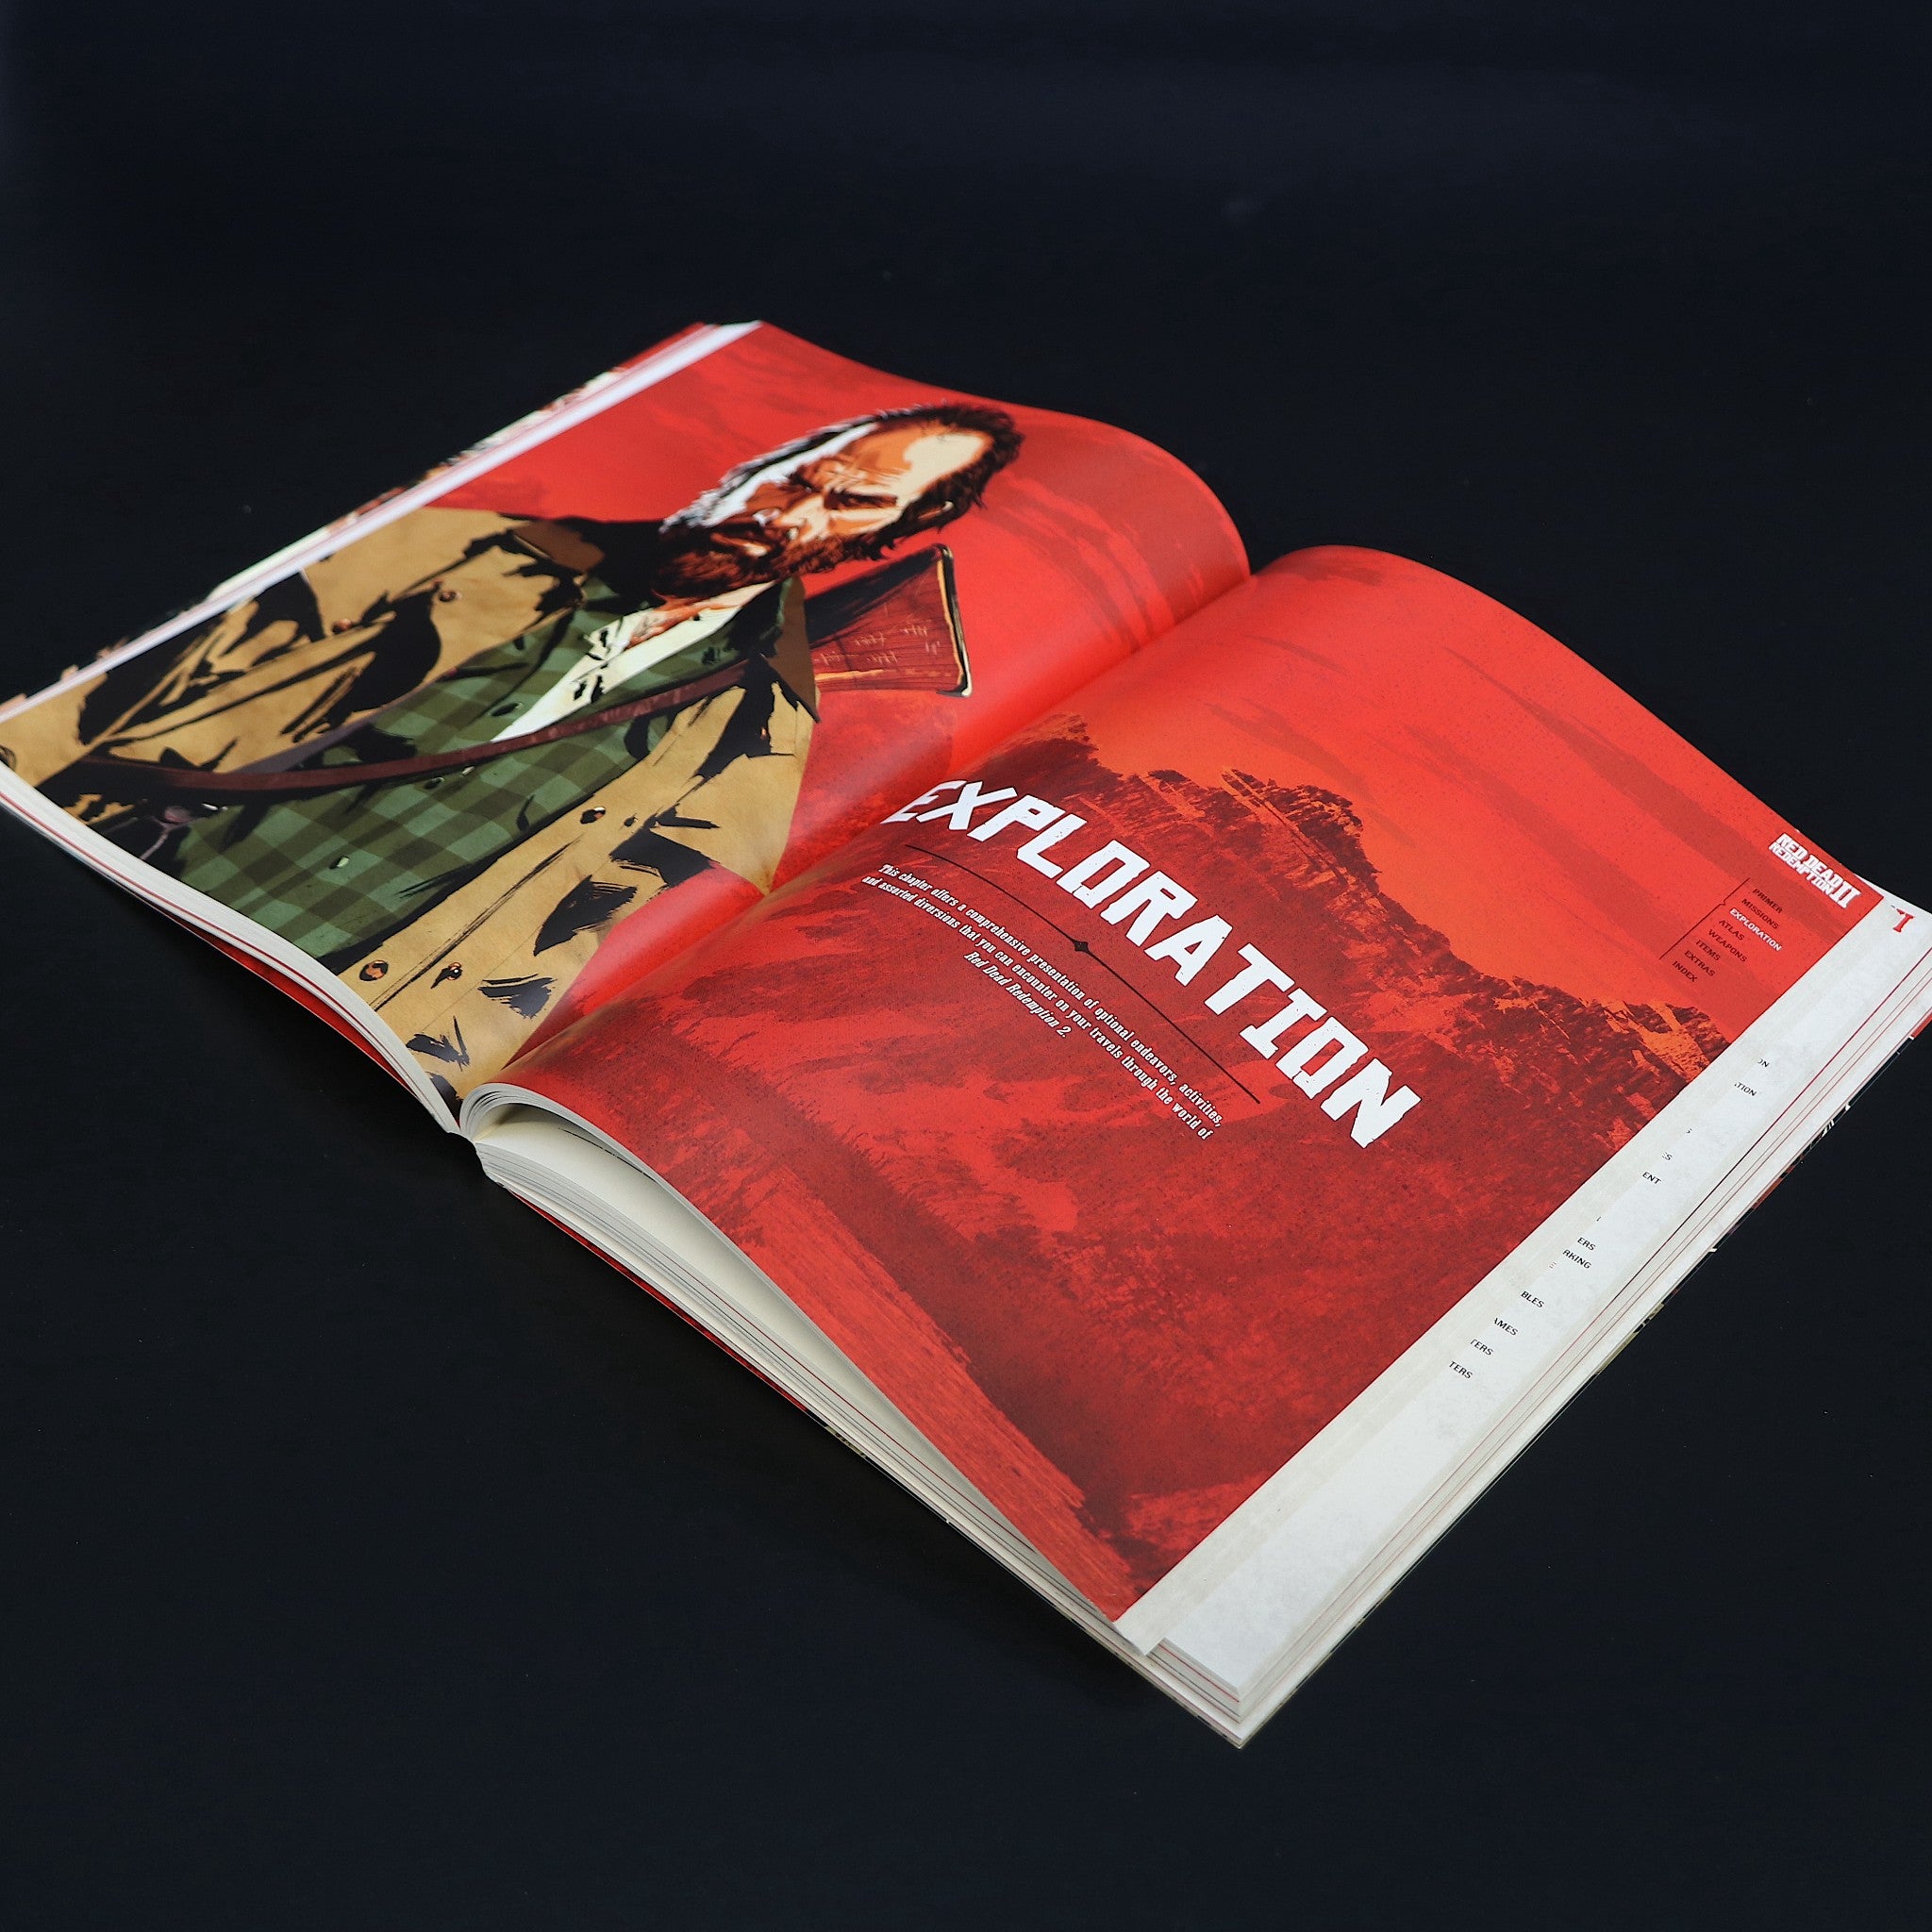 Red Dead Redemption II (2) | The Complete Official Piggyback Strategy Guide Book